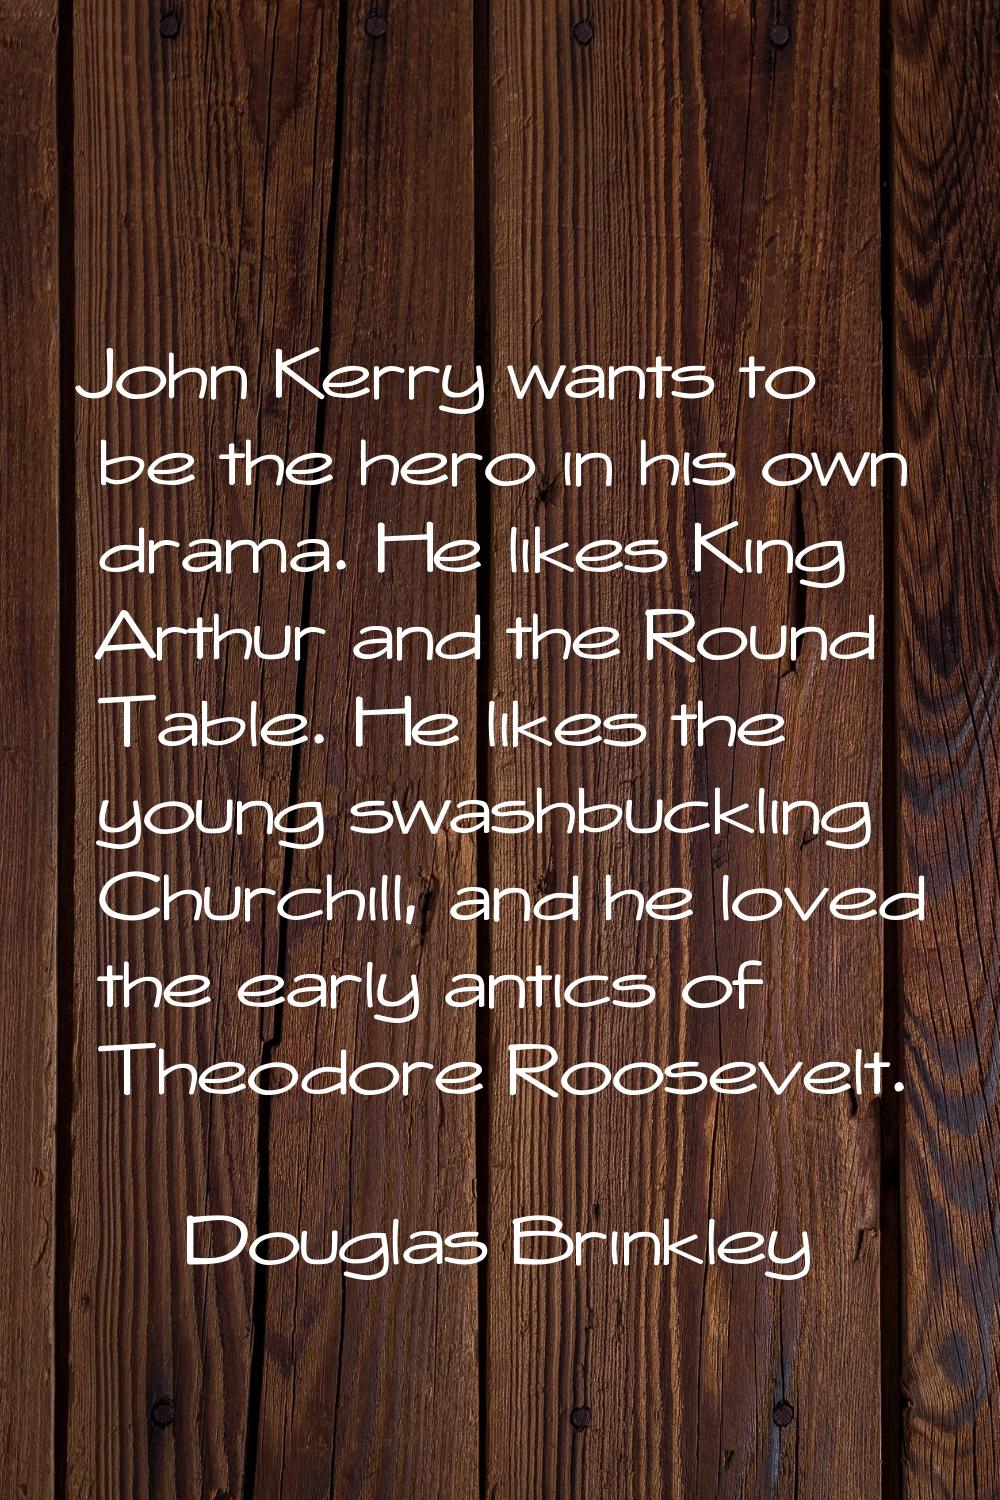 John Kerry wants to be the hero in his own drama. He likes King Arthur and the Round Table. He like